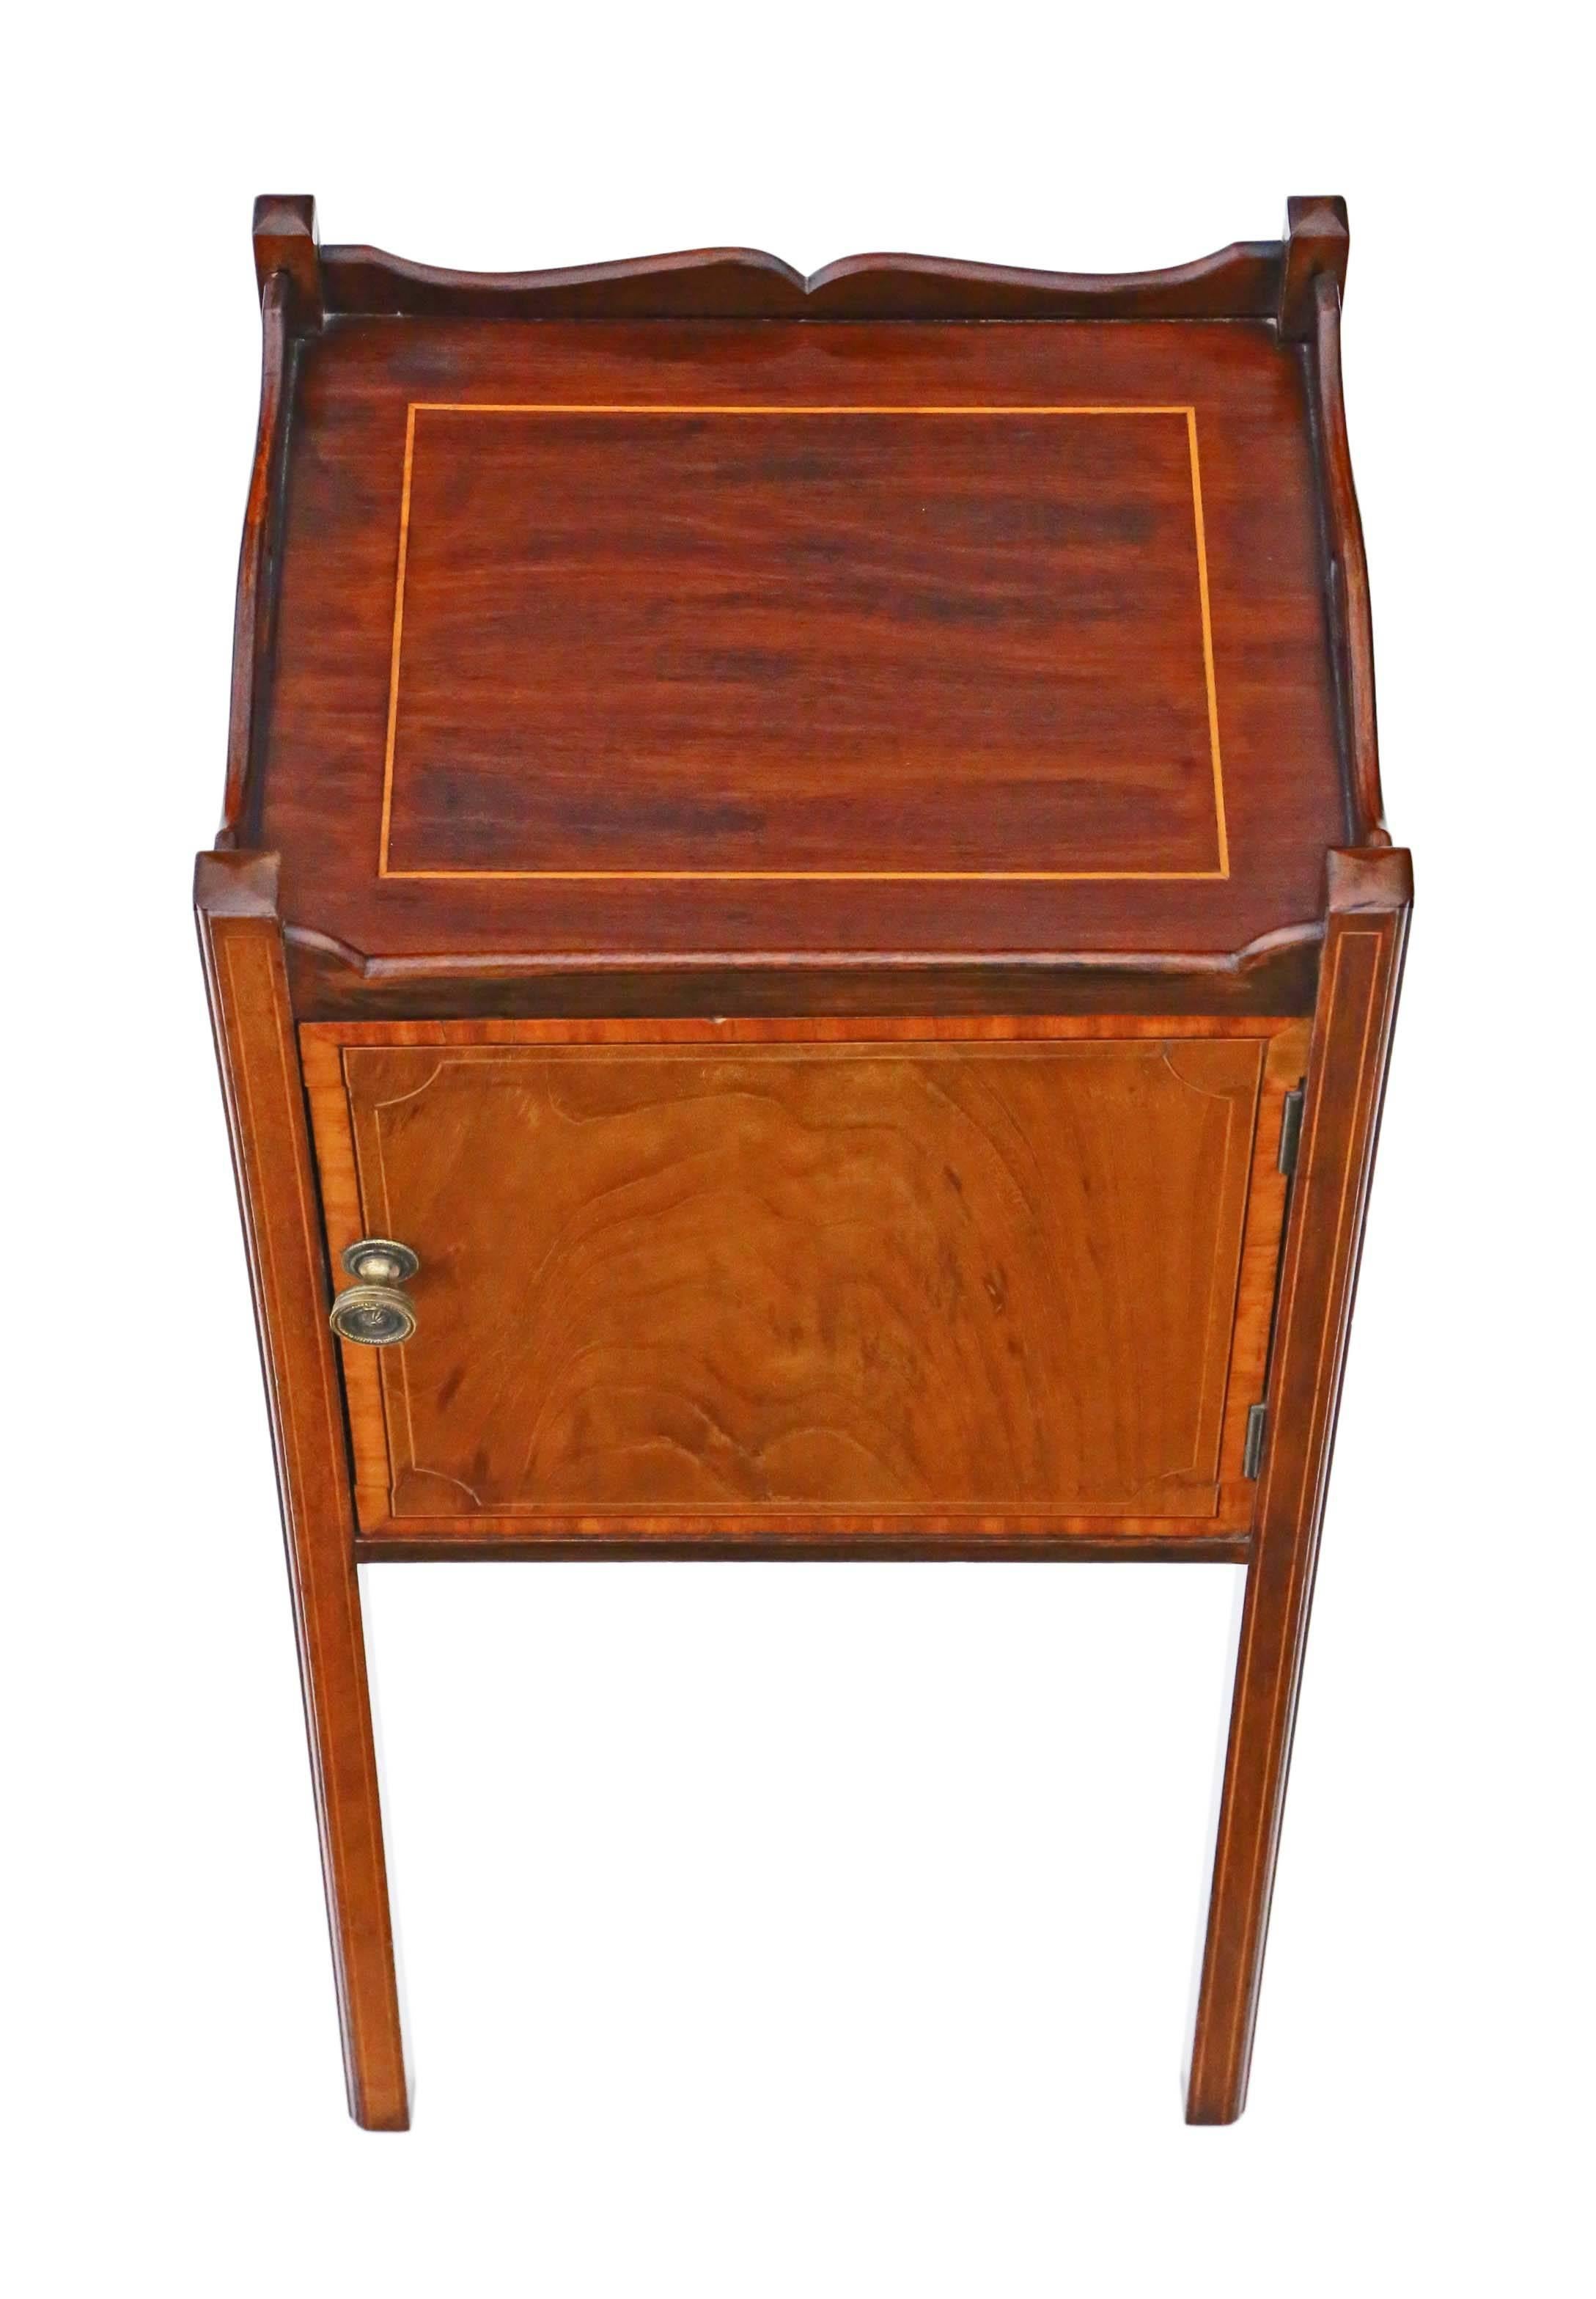 Antique Georgian Revival, circa 1905 Mahogany Tray Top Bedside Table Cupboard In Good Condition For Sale In Wisbech, Walton Wisbech